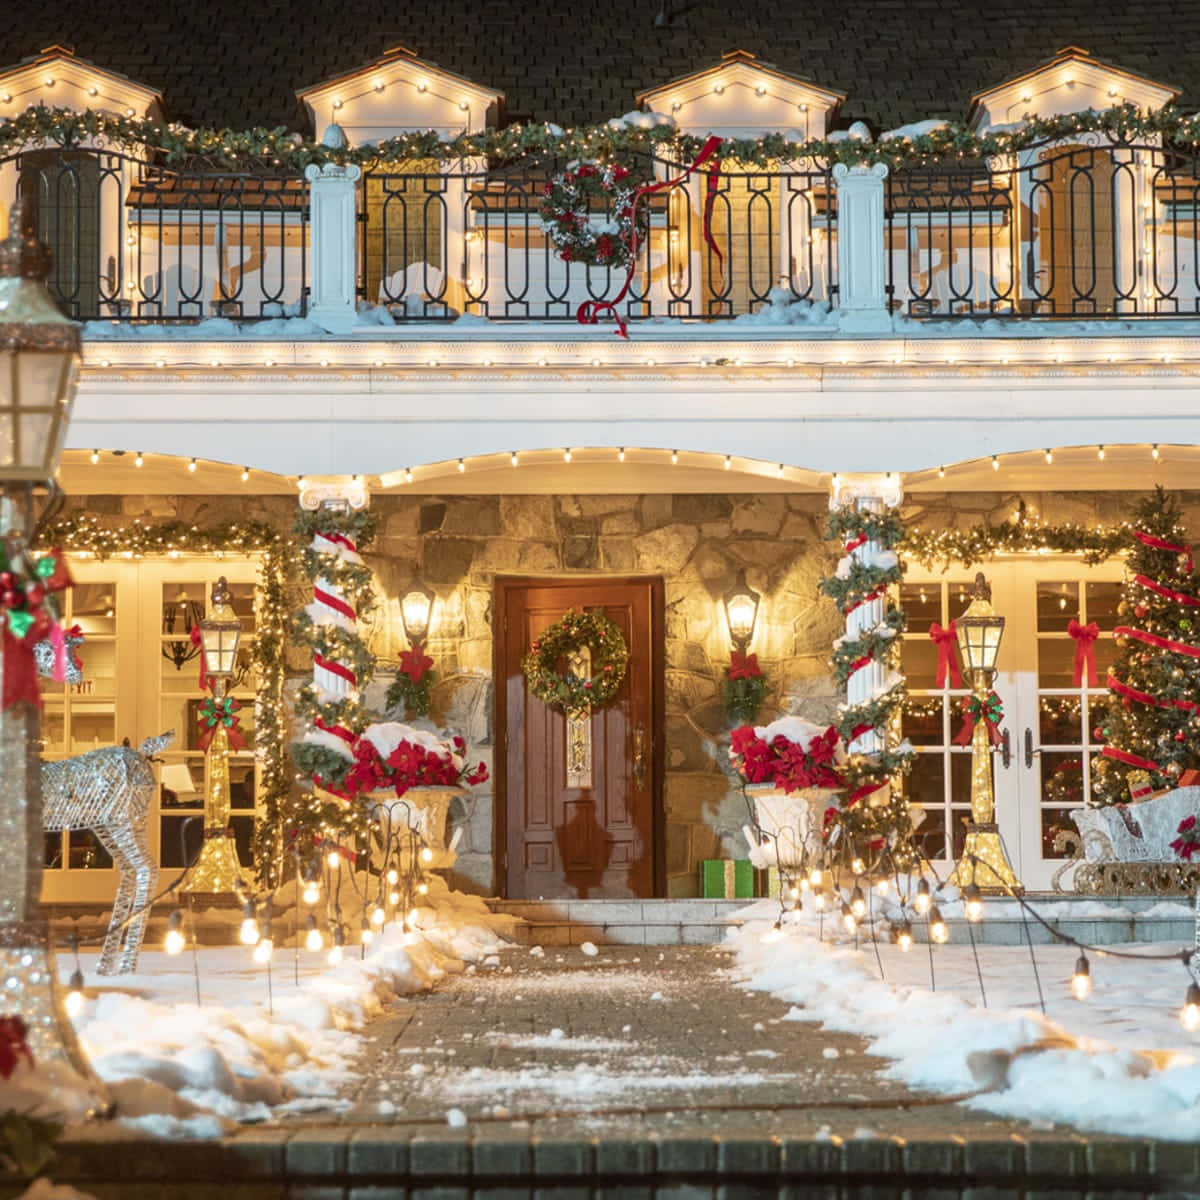 A House With Christmas Lights And Decorations On The Front Porch